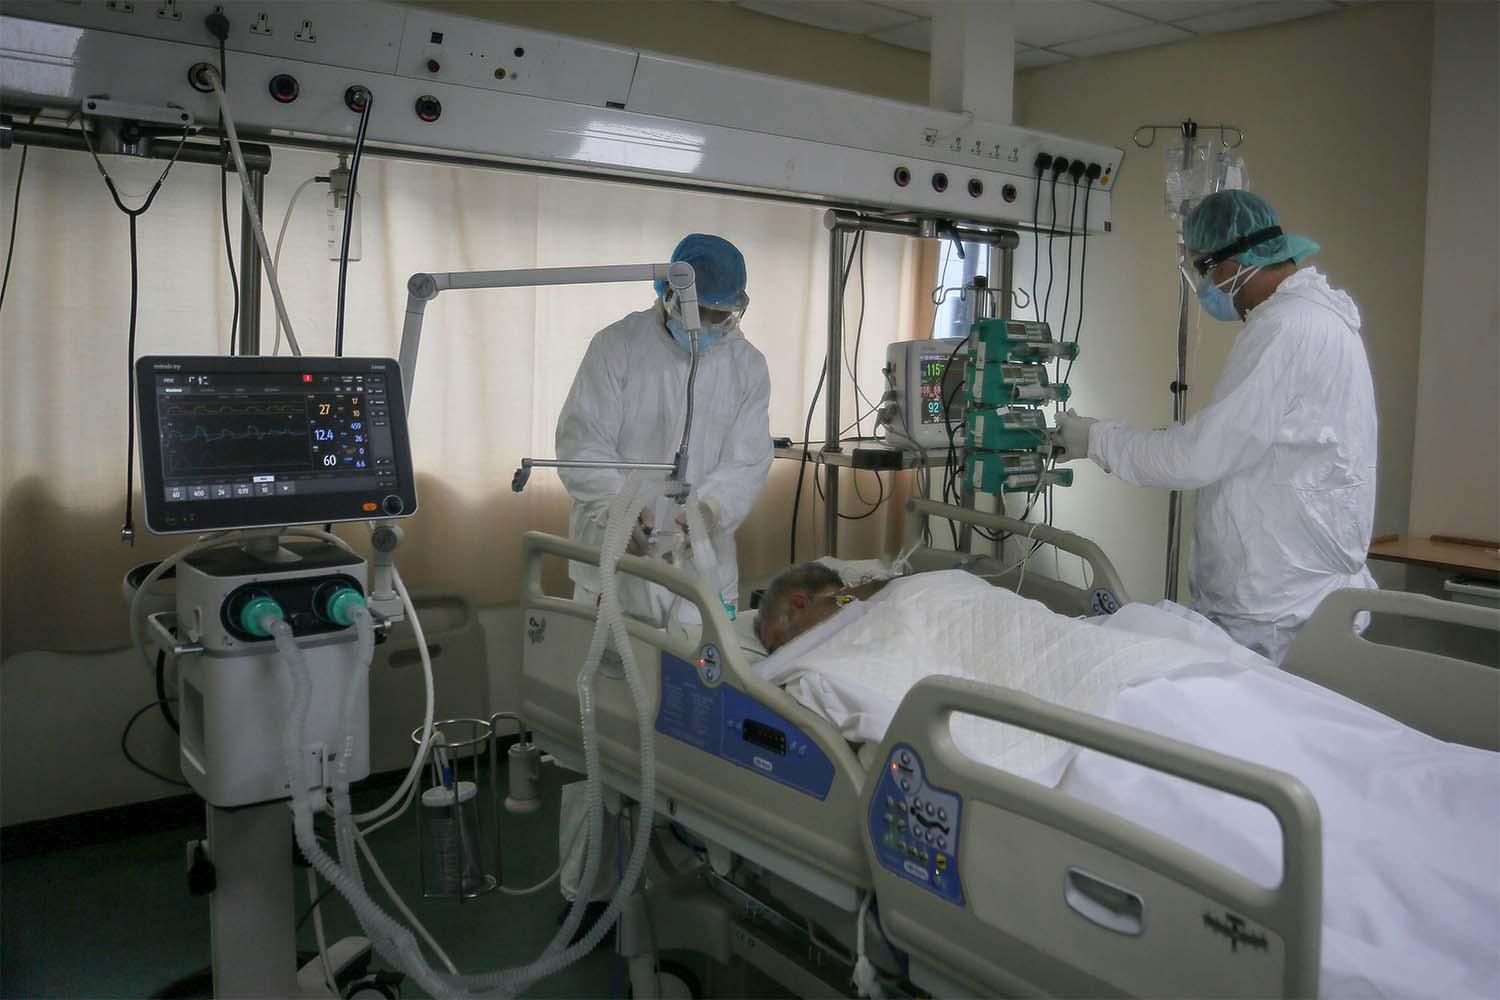 Intensive care units were at critical capacity when Lebanon ordered the lockdown 